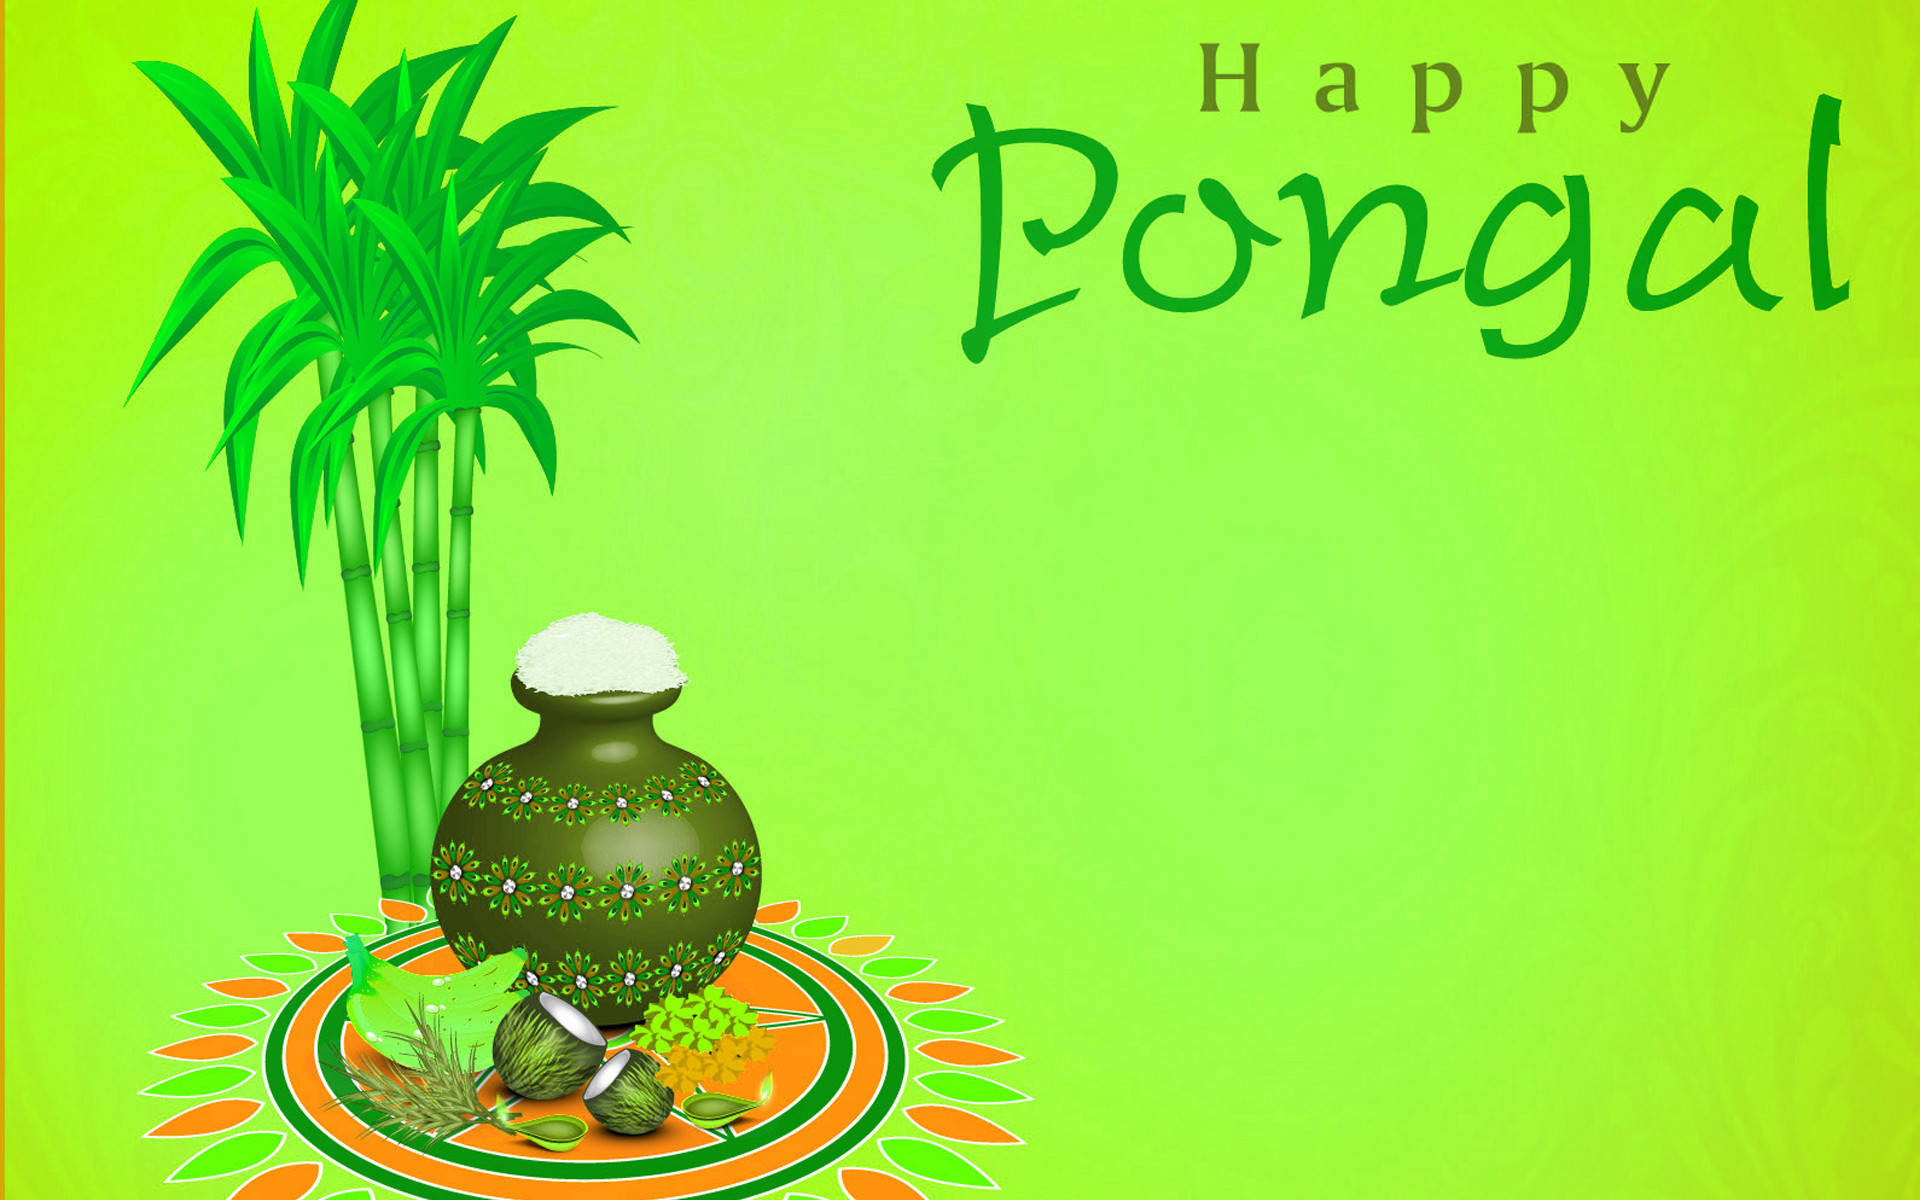 Free Pongal Wallpaper Downloads, [100+] Pongal Wallpapers for FREE |  